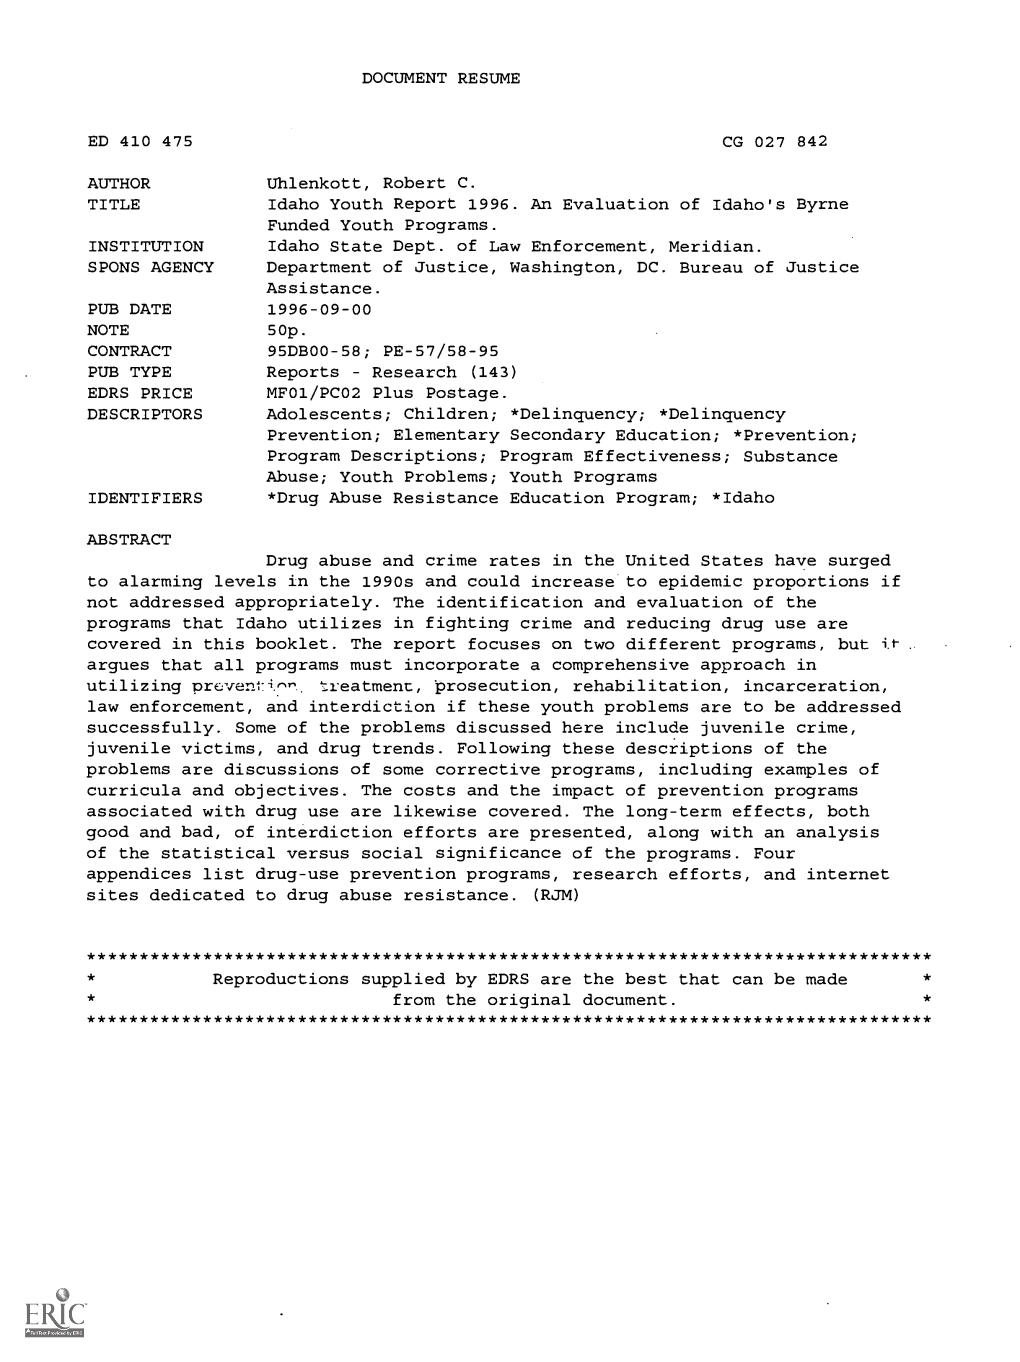 Idaho Youth Report 1996. an Evaluation of Idaho's Byrne Funded Youth Programs